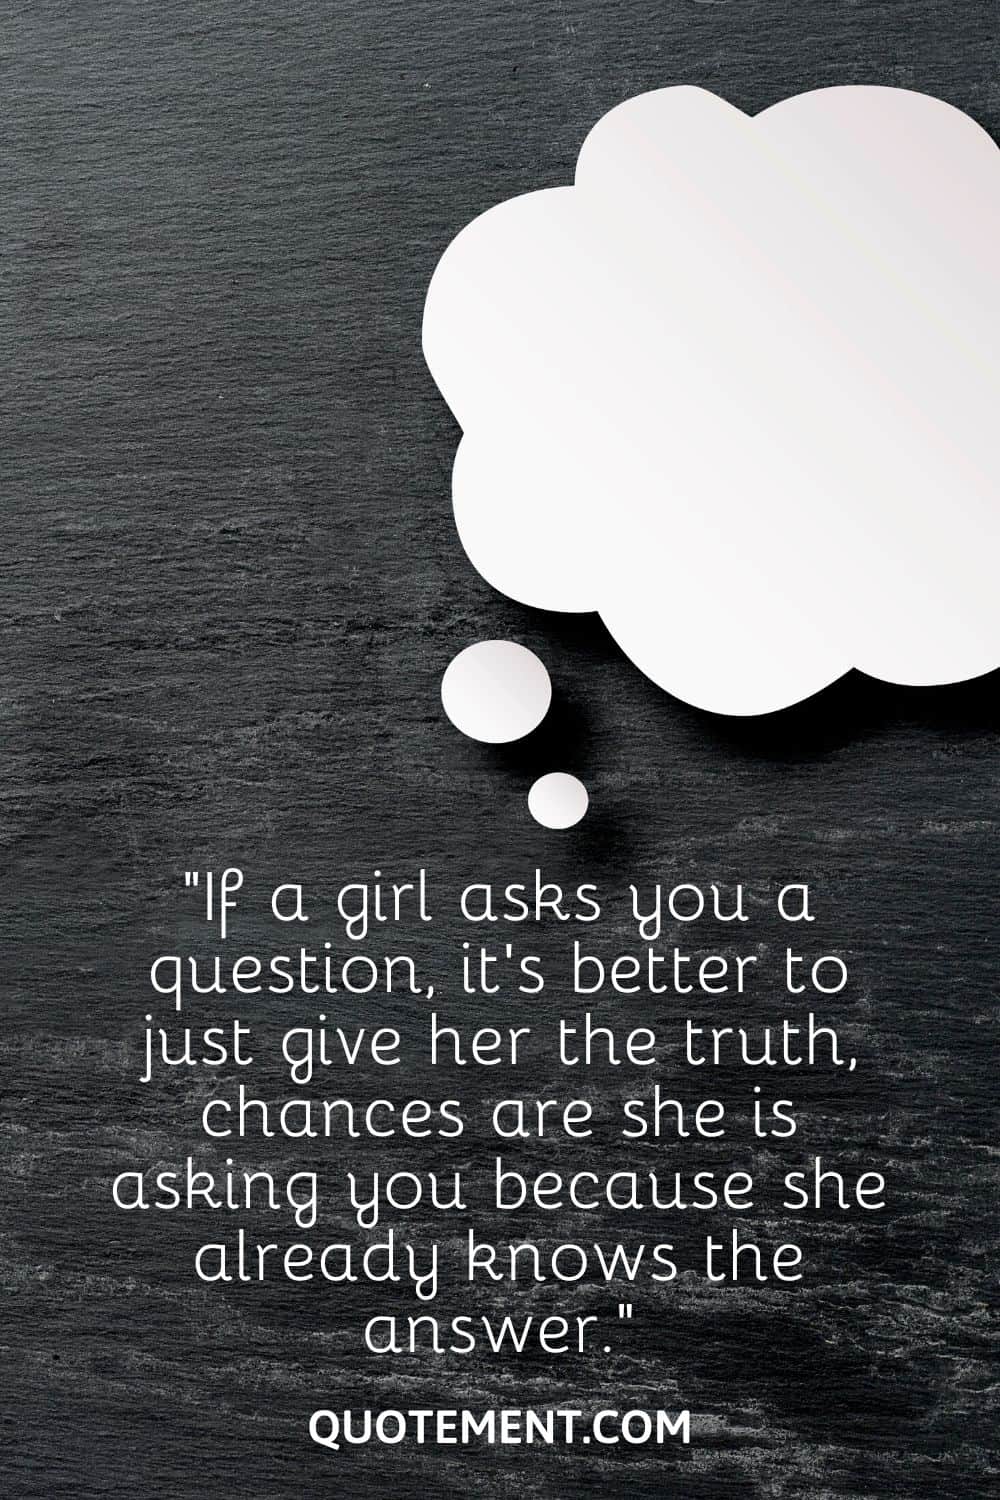 “If a girl asks you a question, it’s better to just give her the truth, chances are she is asking you because she already knows the answer.”